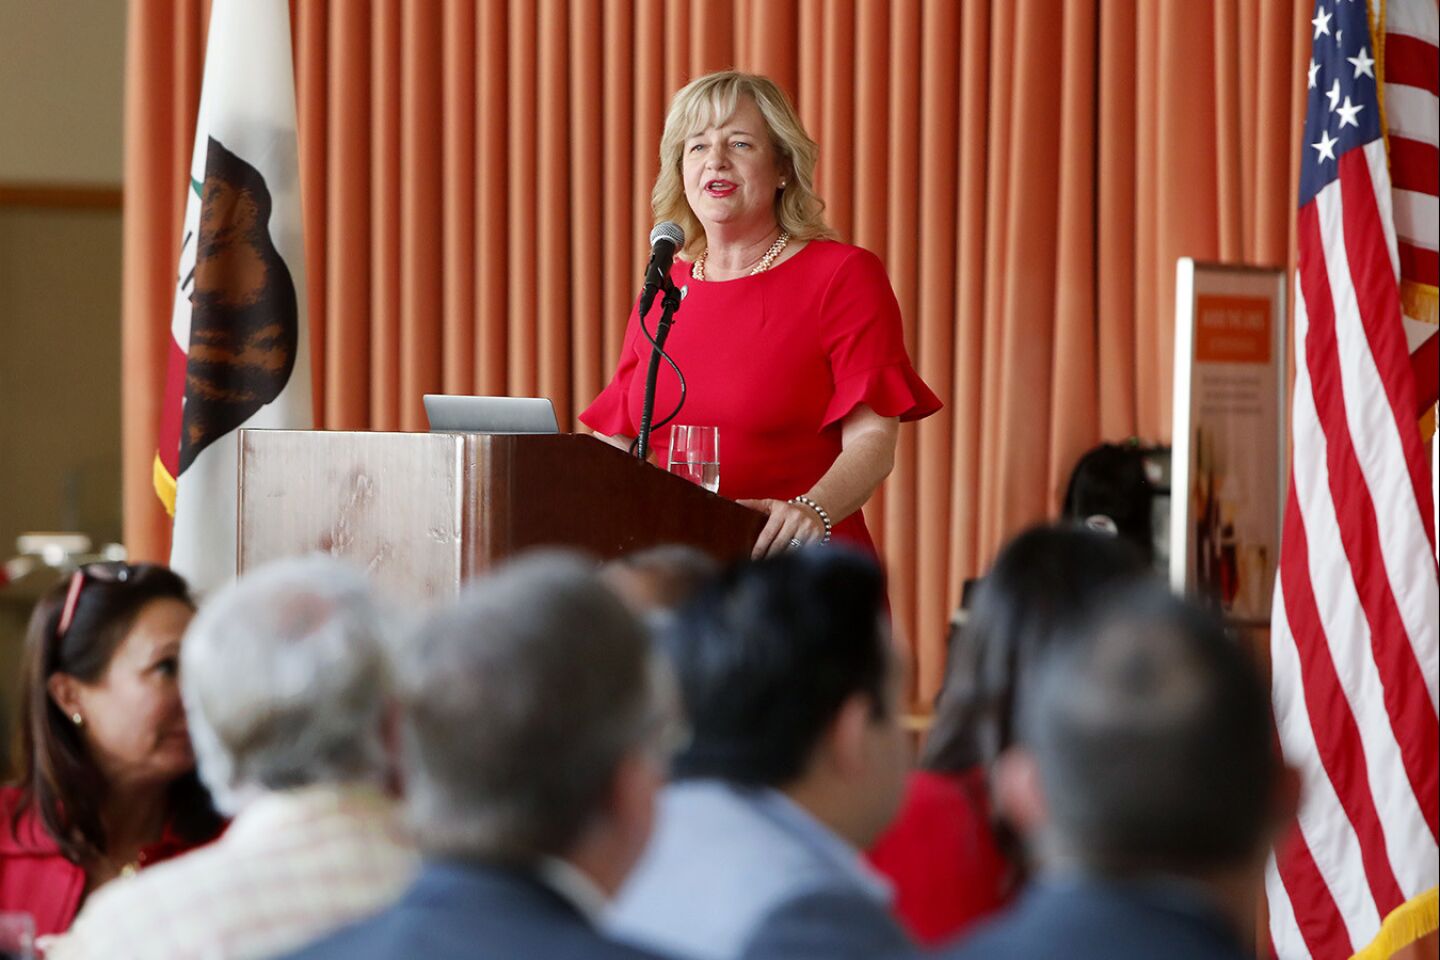 Photo Gallery: Costa Mesa State of the City luncheon and awards